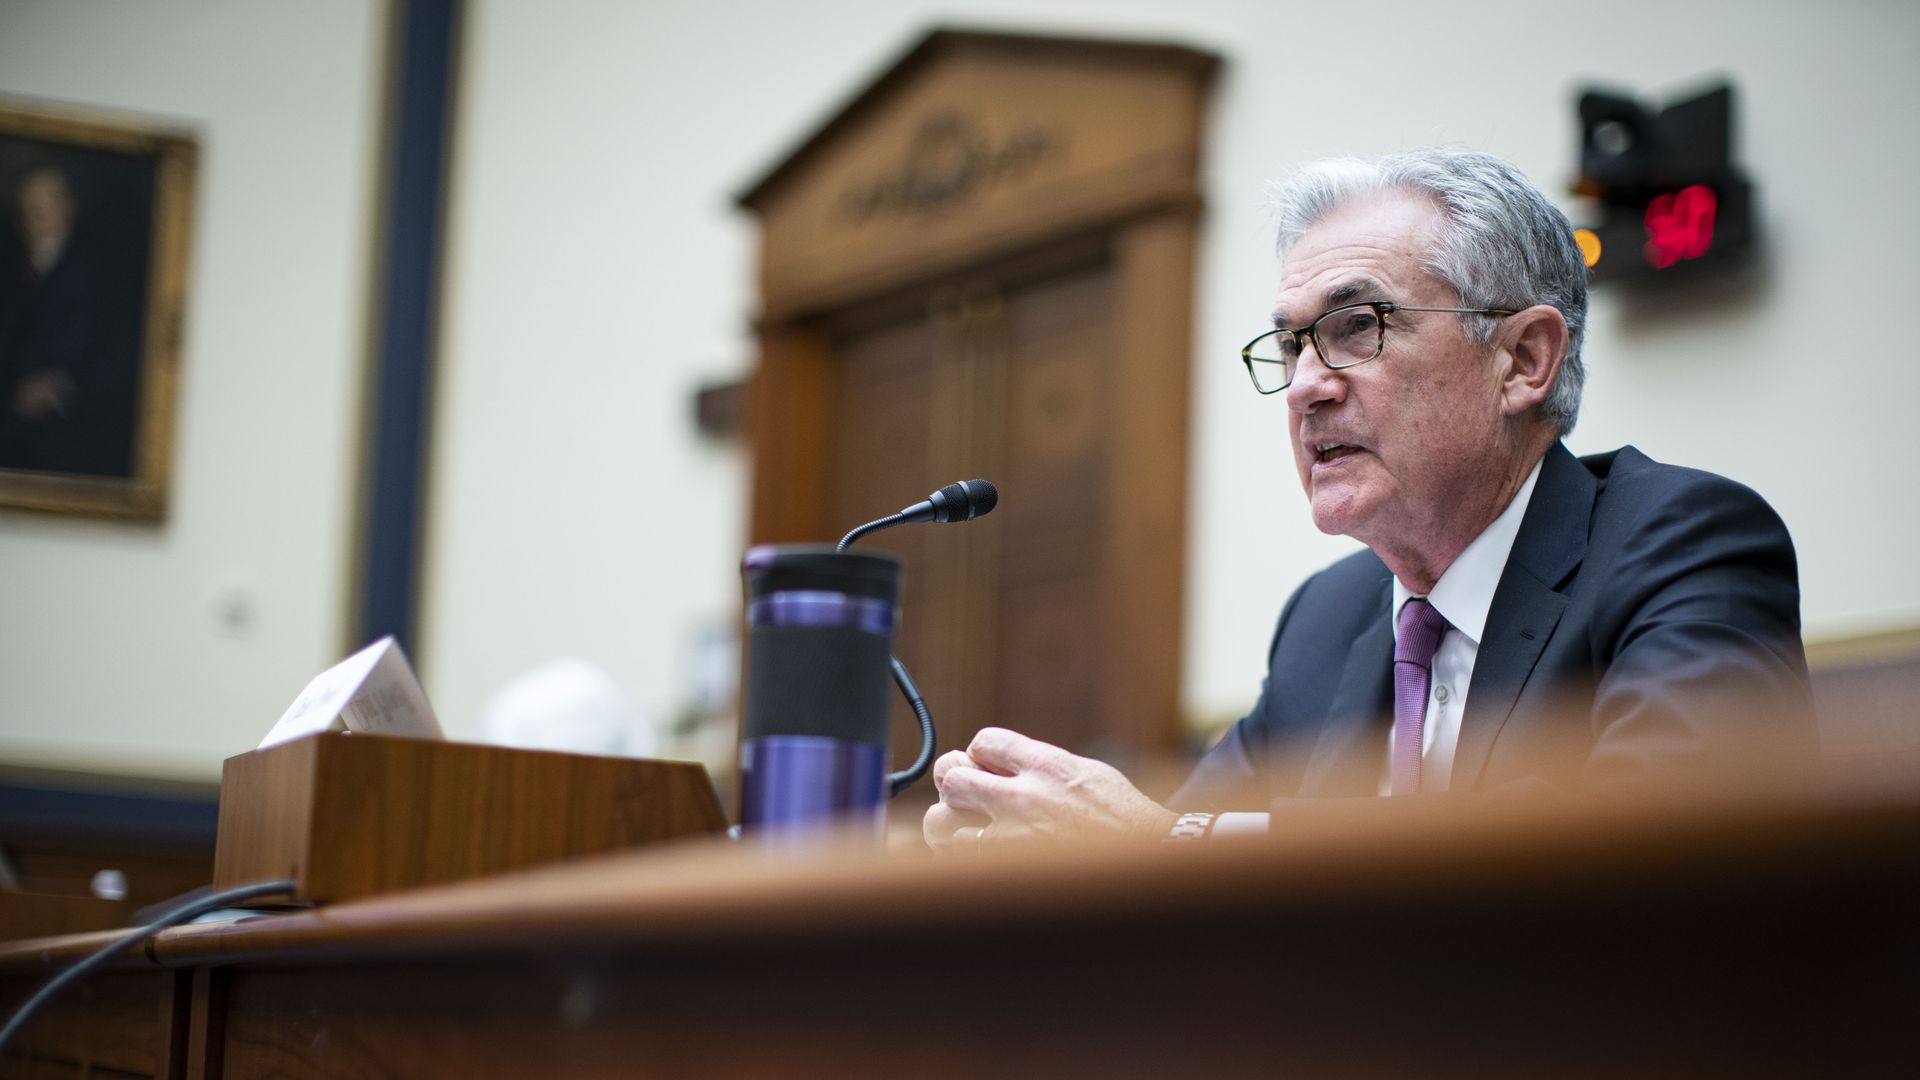 Jerome Powell, chairman of the U.S. Federal Reserve, speaks during a House Financial Services Committee hearing in Washington, D.C.